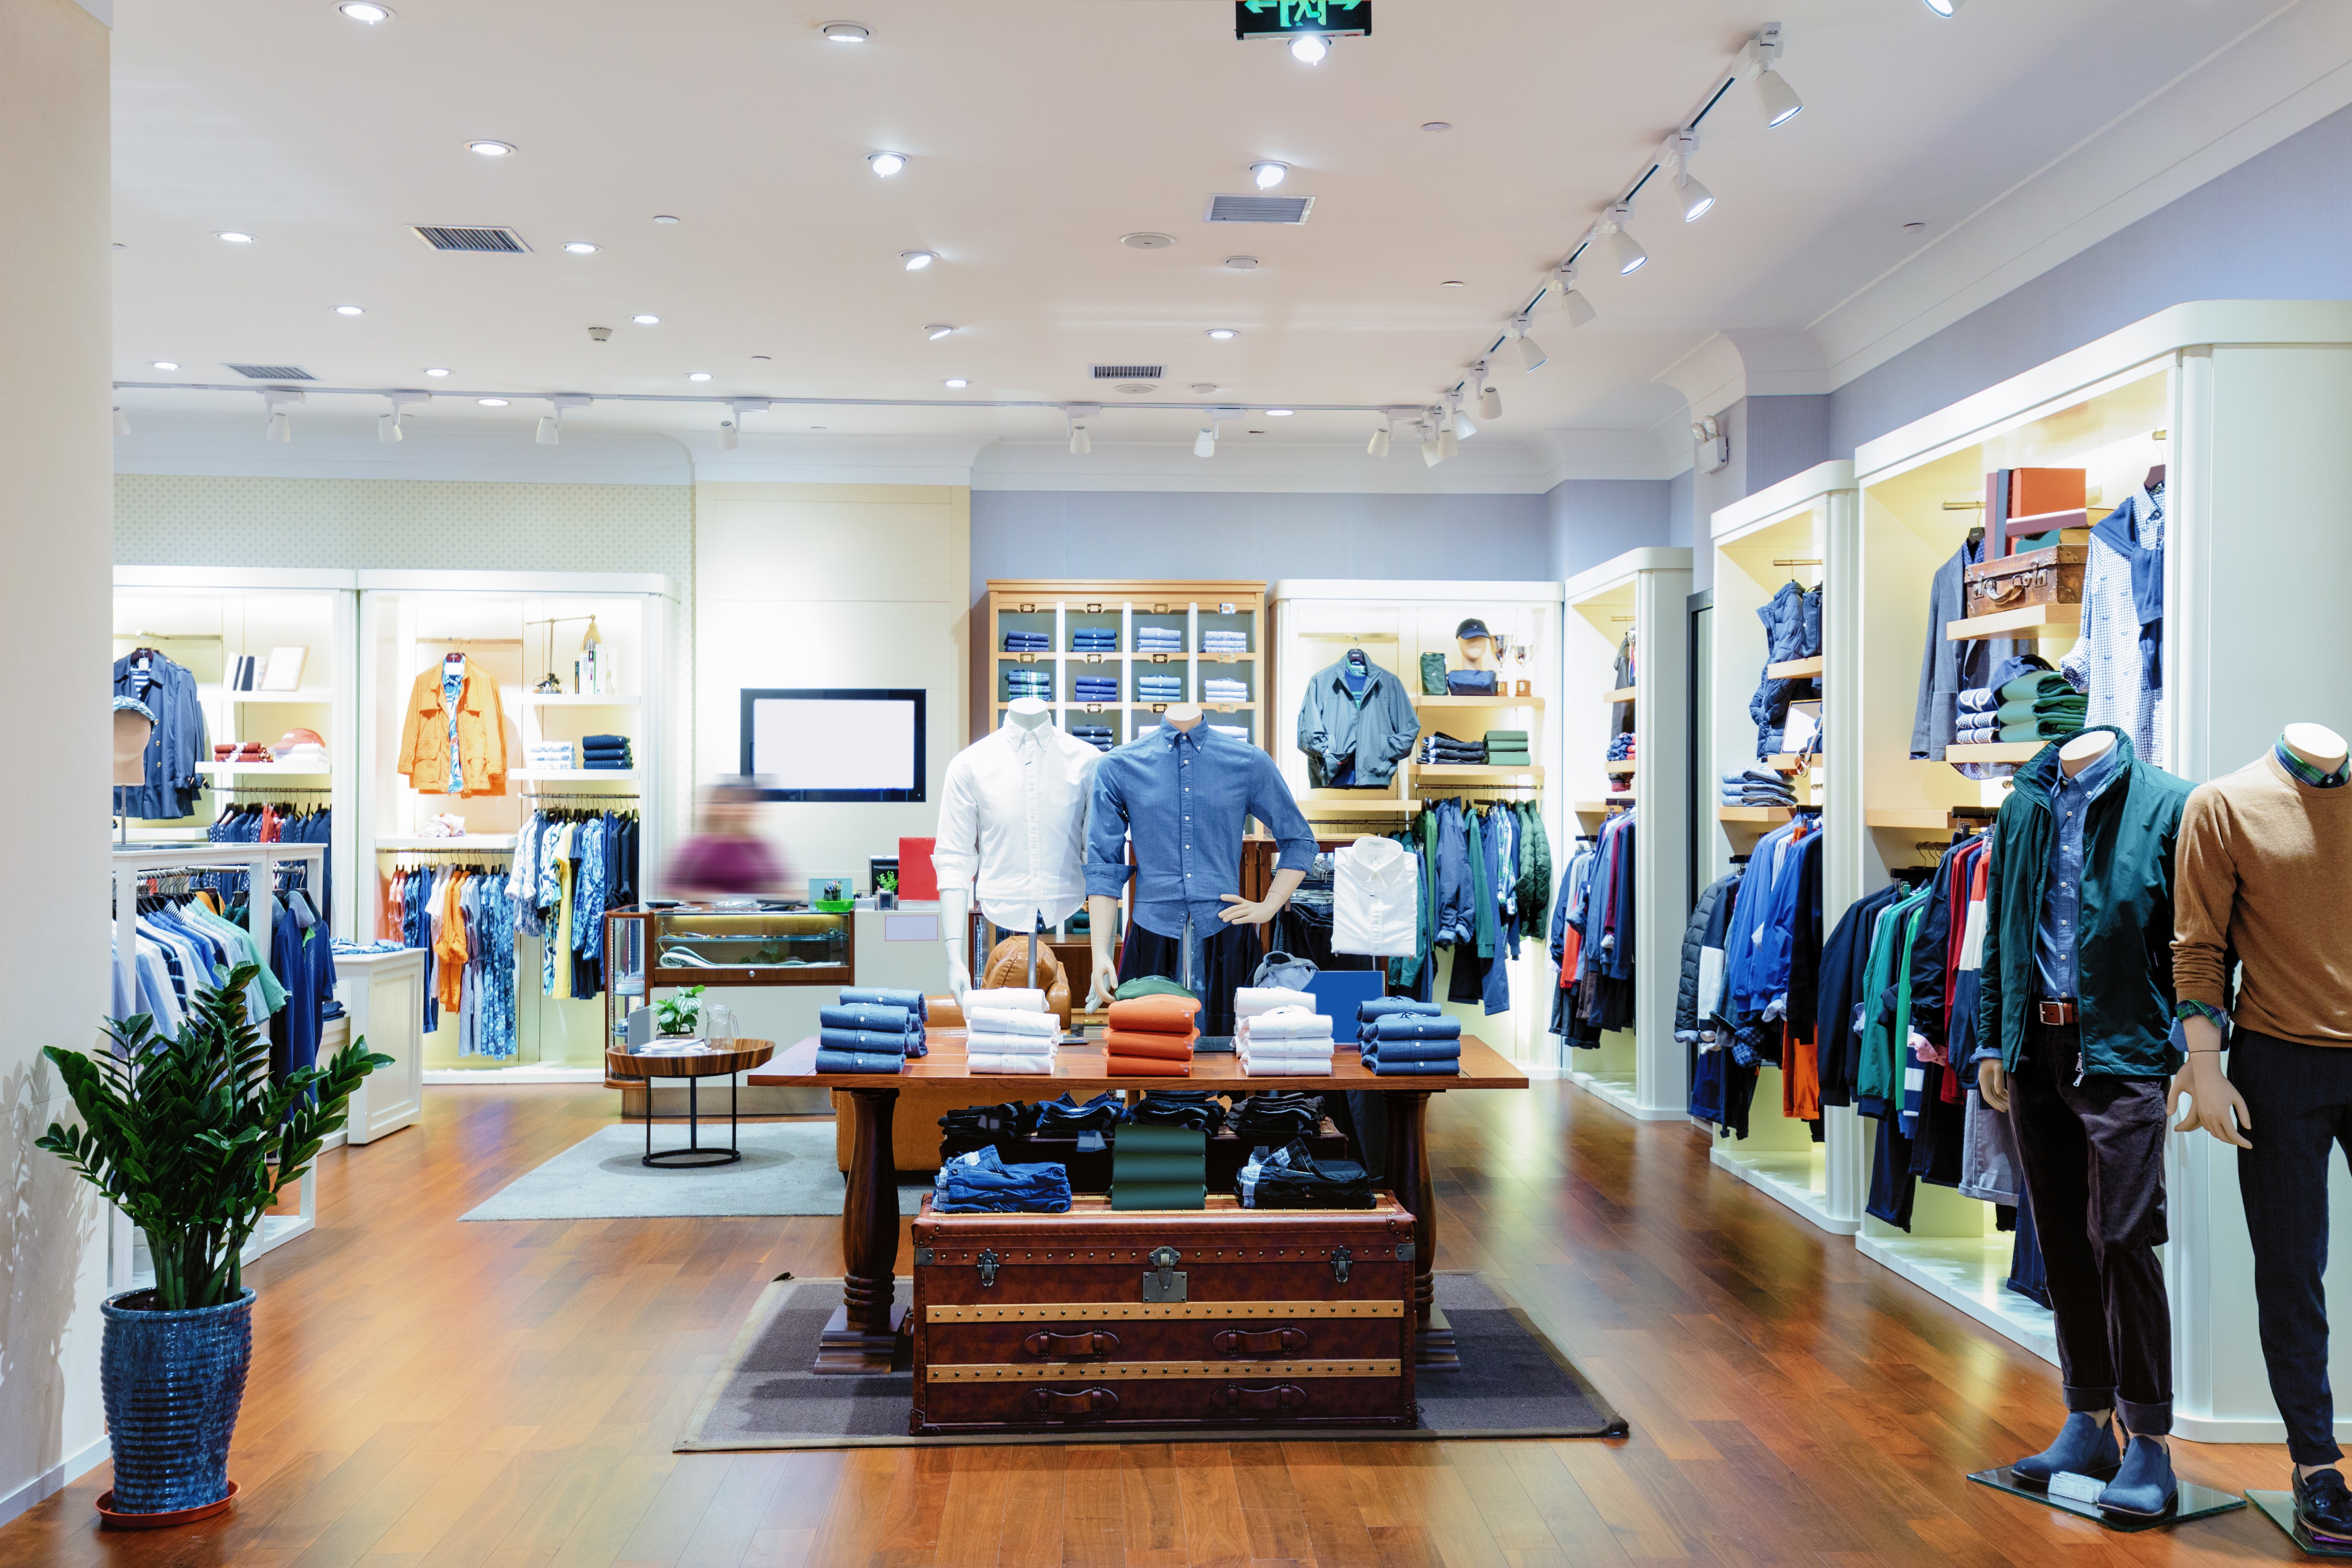 Using Retail Lighting to Enhance Your Customer's Experience